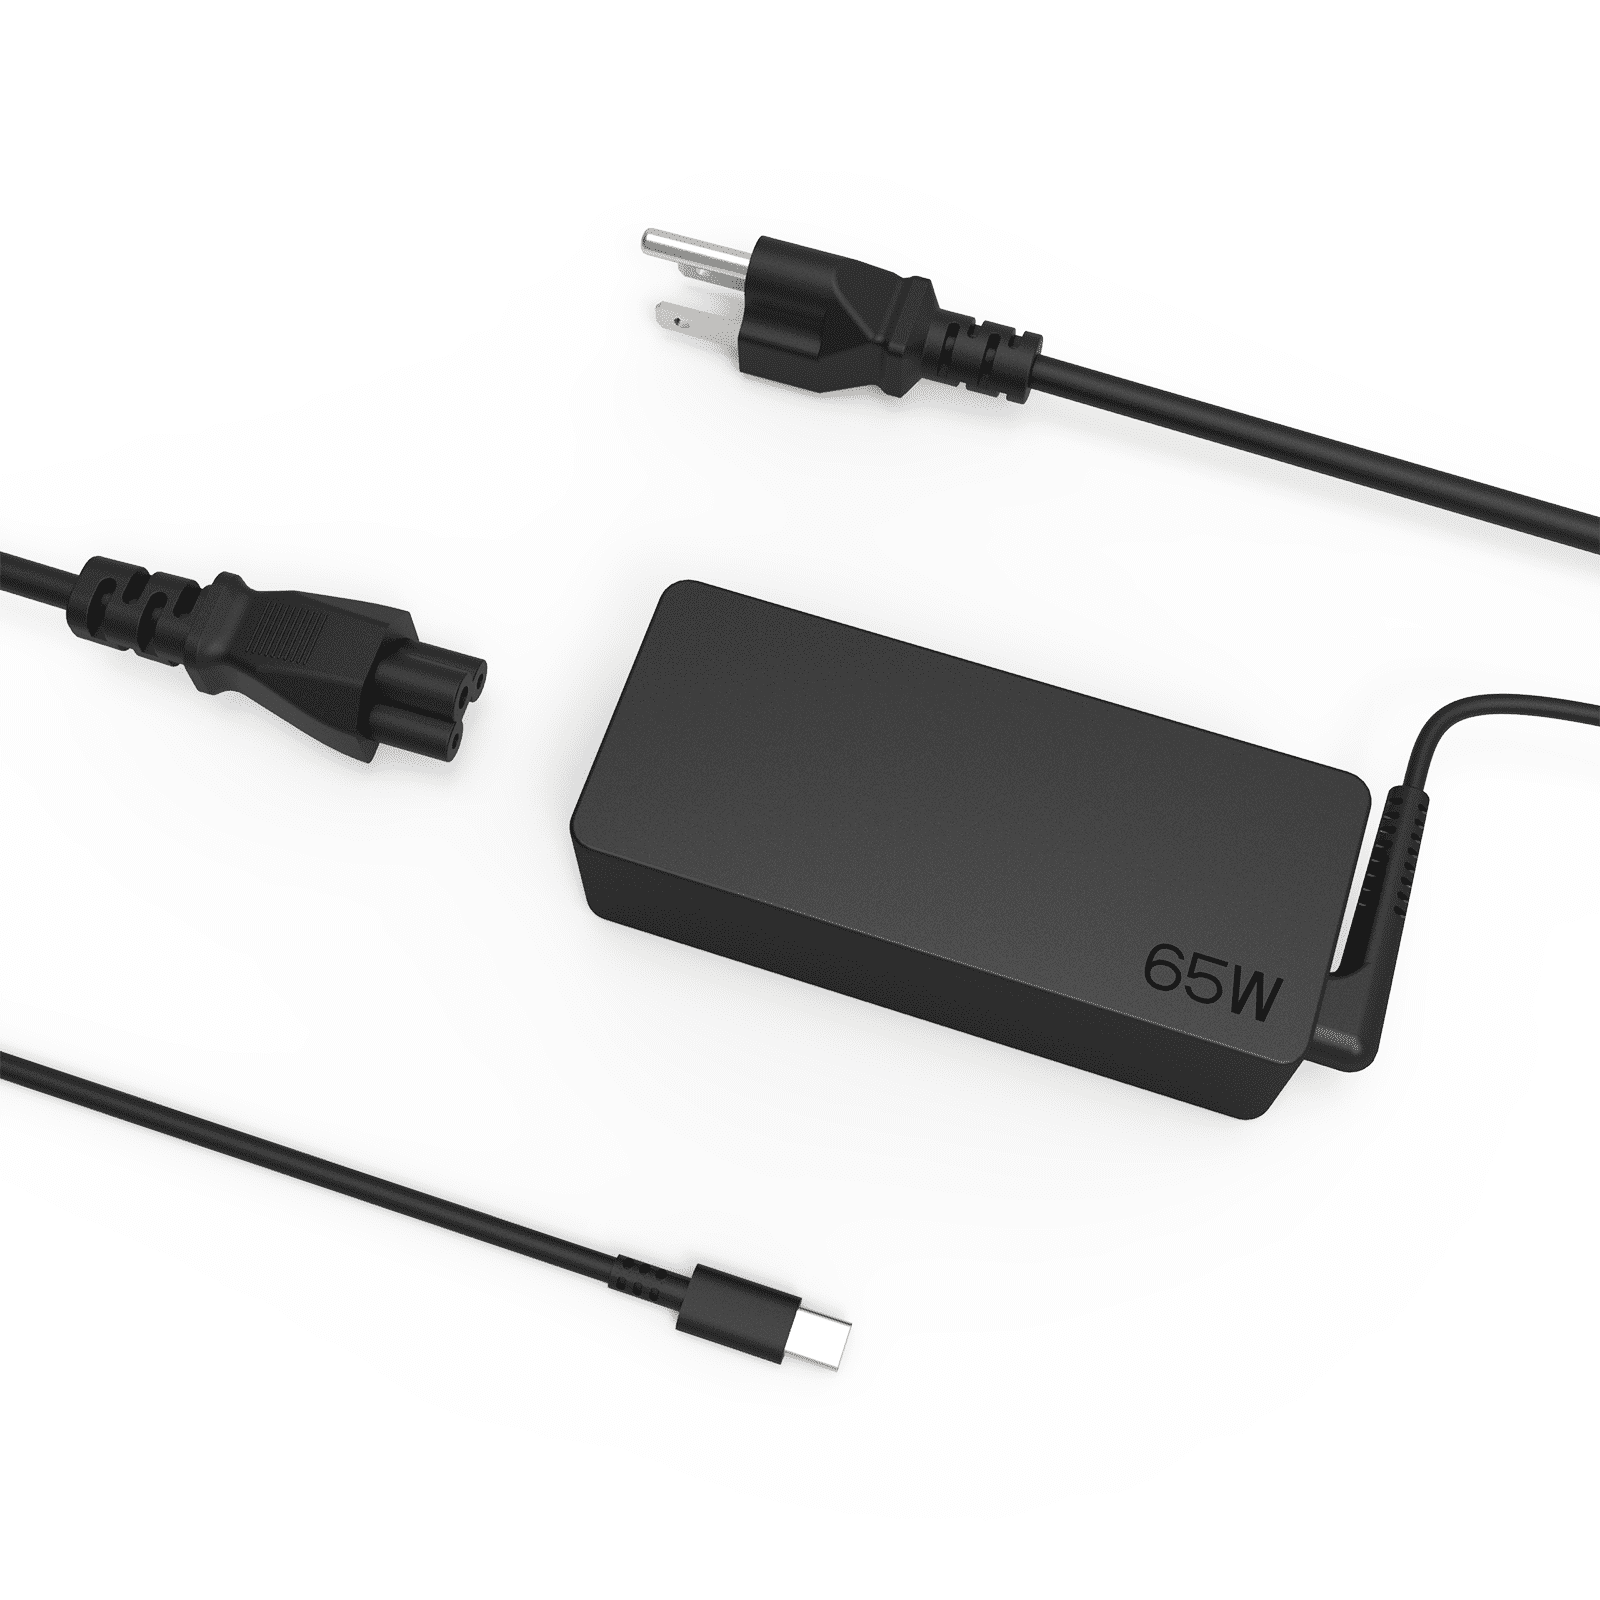 65W 45W USB C Laptop Charger for Dell Chromebook 3100 3400 5190 2-in-1  Latitude 5420 7420 7320 5520 7400 7410 5300 3380 5285 5290 XPS 13 9300 9310  7390 Replacement Type C AC Adapter Power Supply Cord 